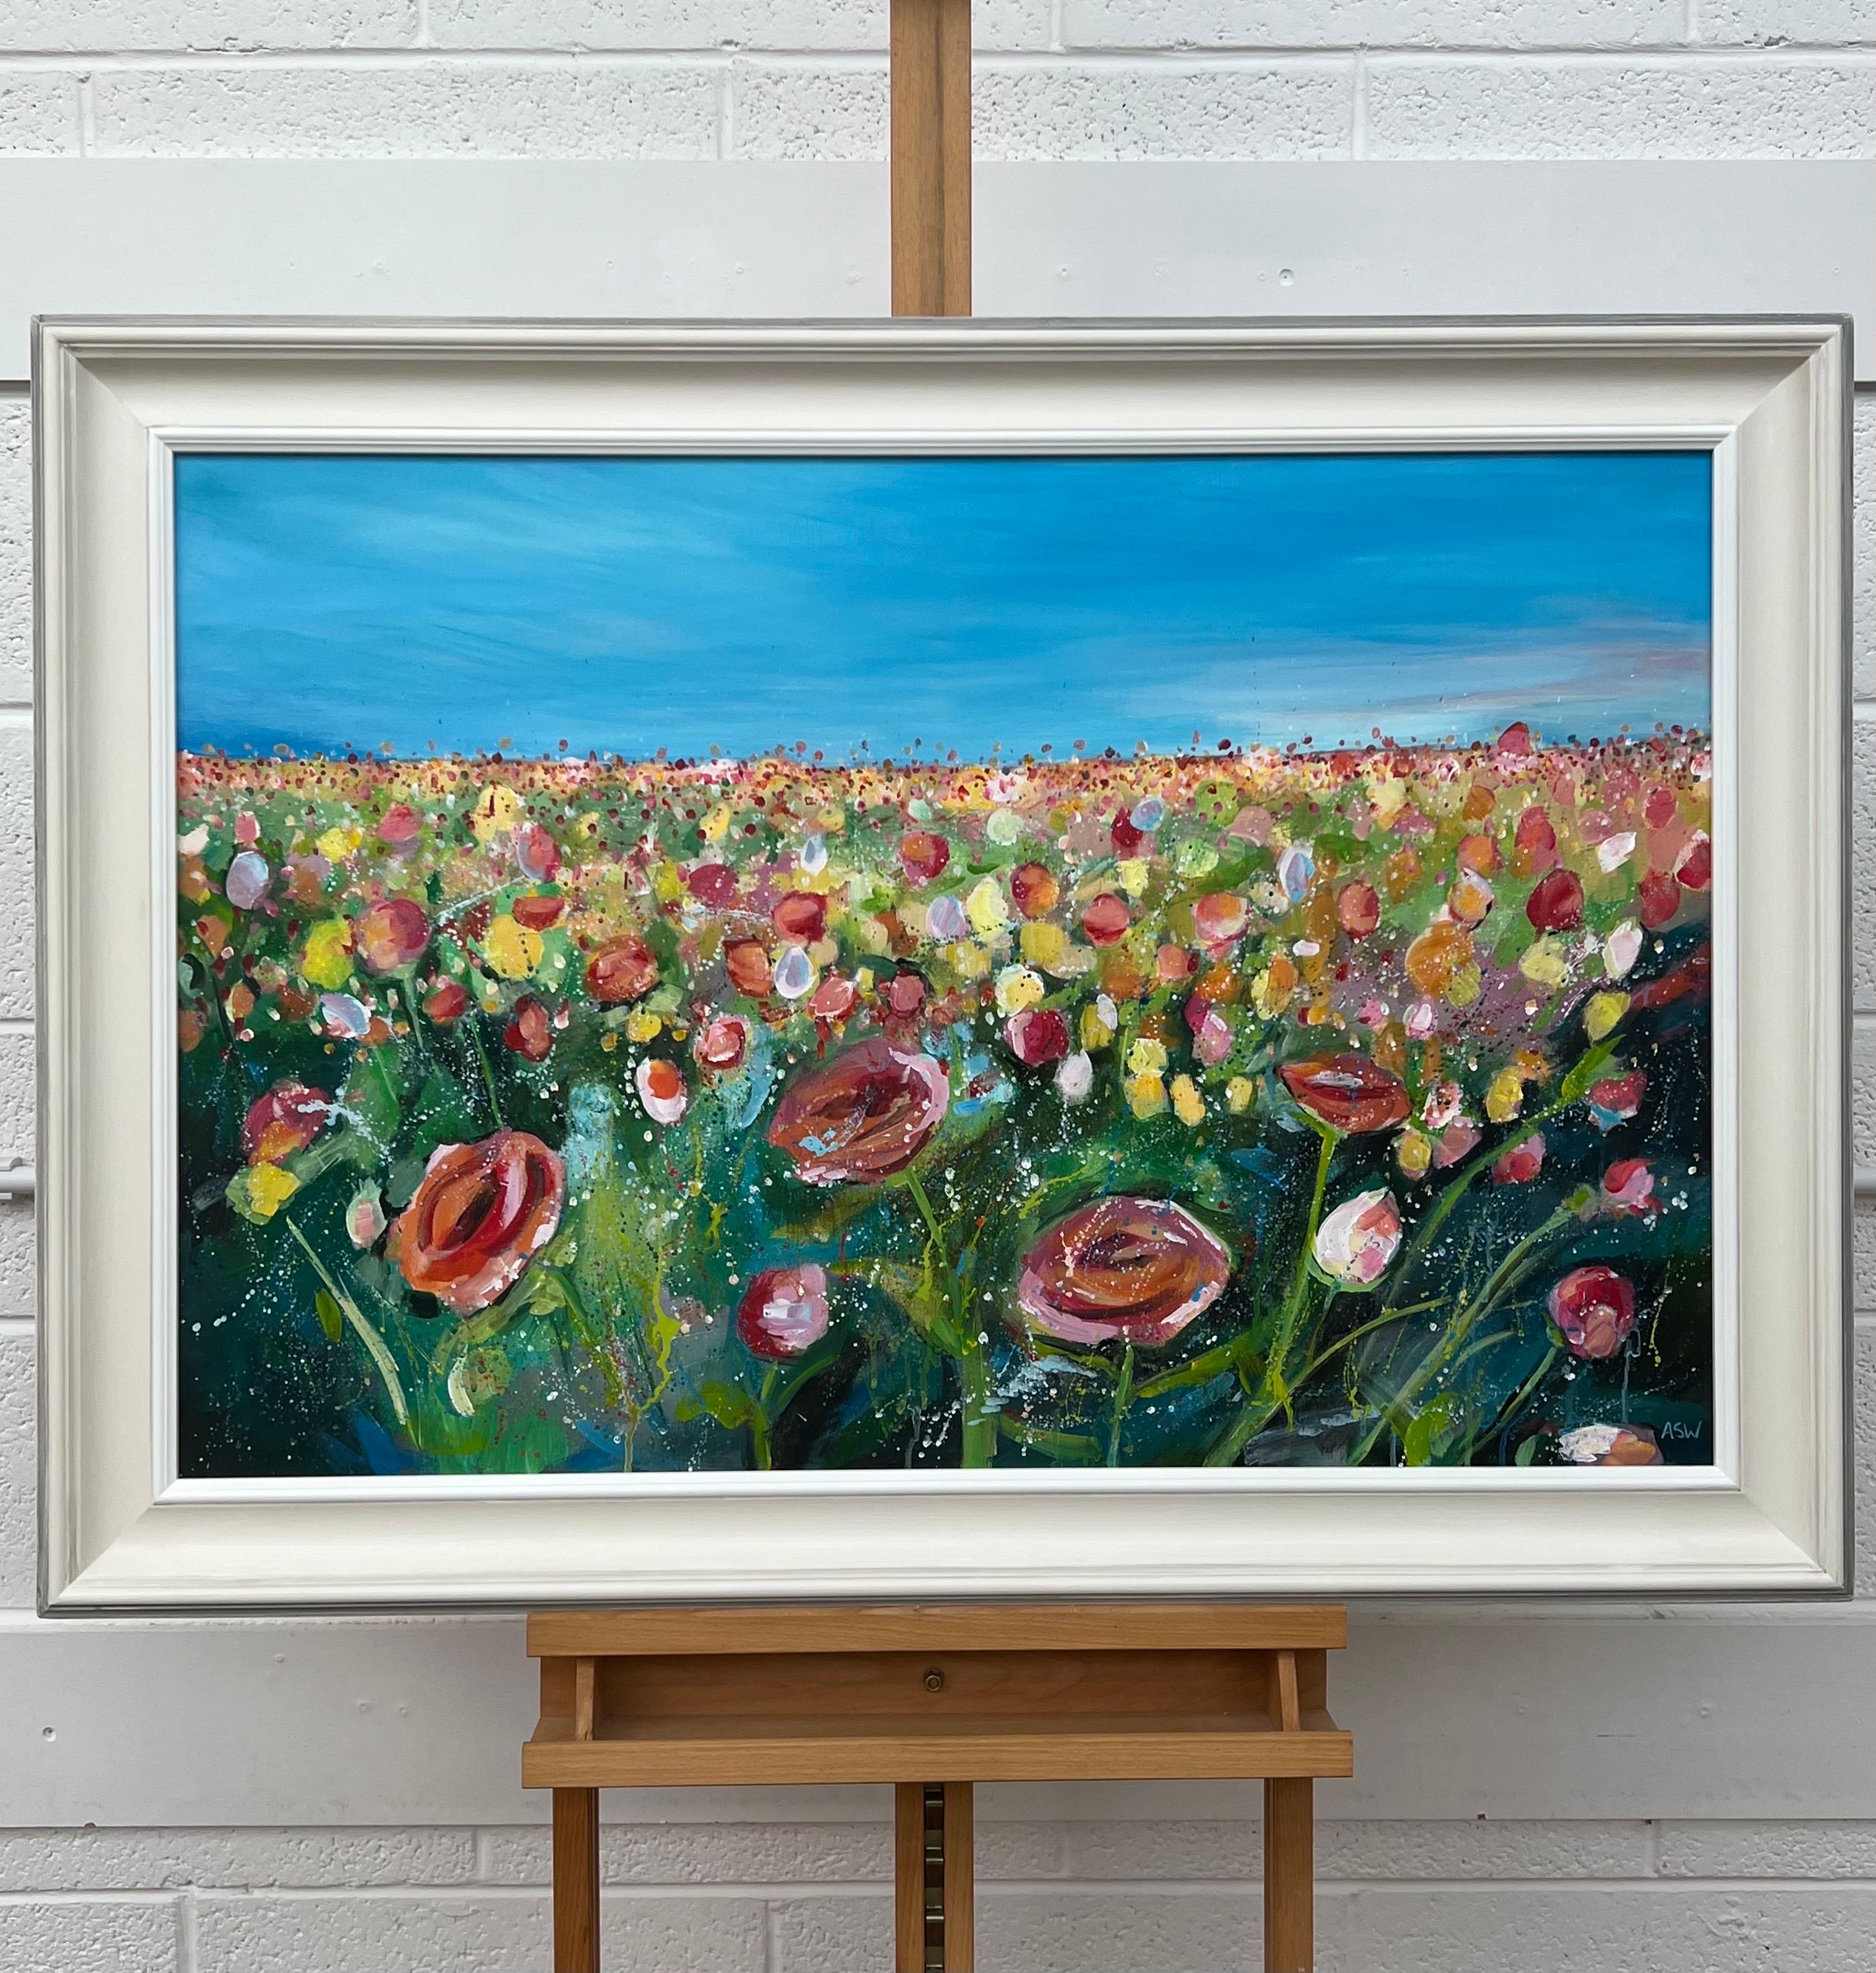 English Meadow Landscape with Wild Red Flowers by Contemporary British Artist, Angela Wakefield. 

Art measures 36 x 24 inches
Frame measures 42 x 30 inches 

Presented in the highest quality hand-finished off-white Frinton moulding.

Angela